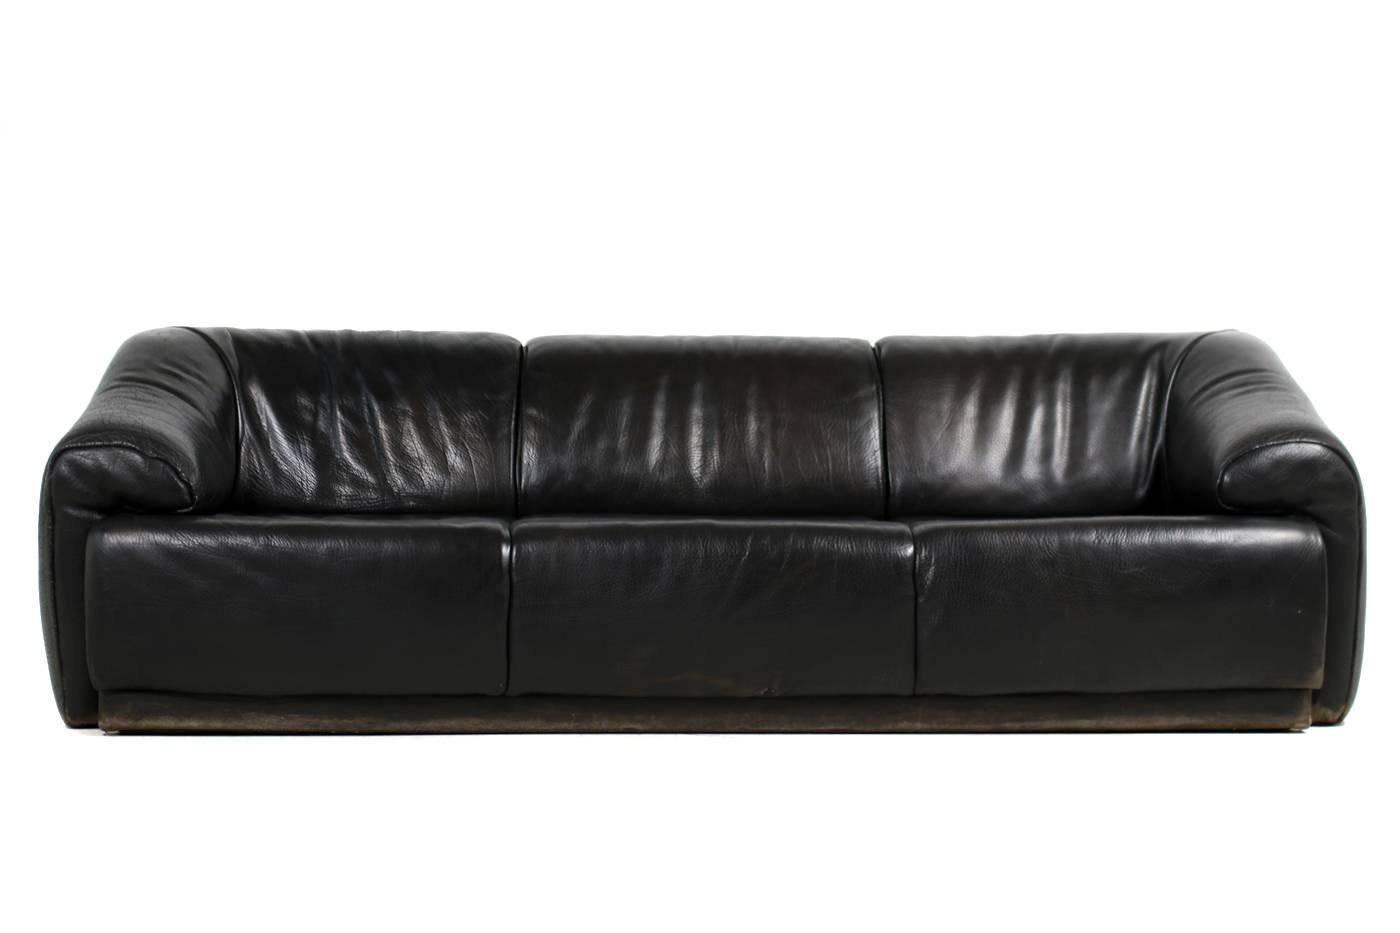 A beautiful and very rare high quality and heavy weight lounge sofa.
Heavy weight because of the solid wood and construction and the thick buffalo leather.
Inspired by De Sede, Joe Colombo and Luigi Colani, beautiful shape, super comfortable, best